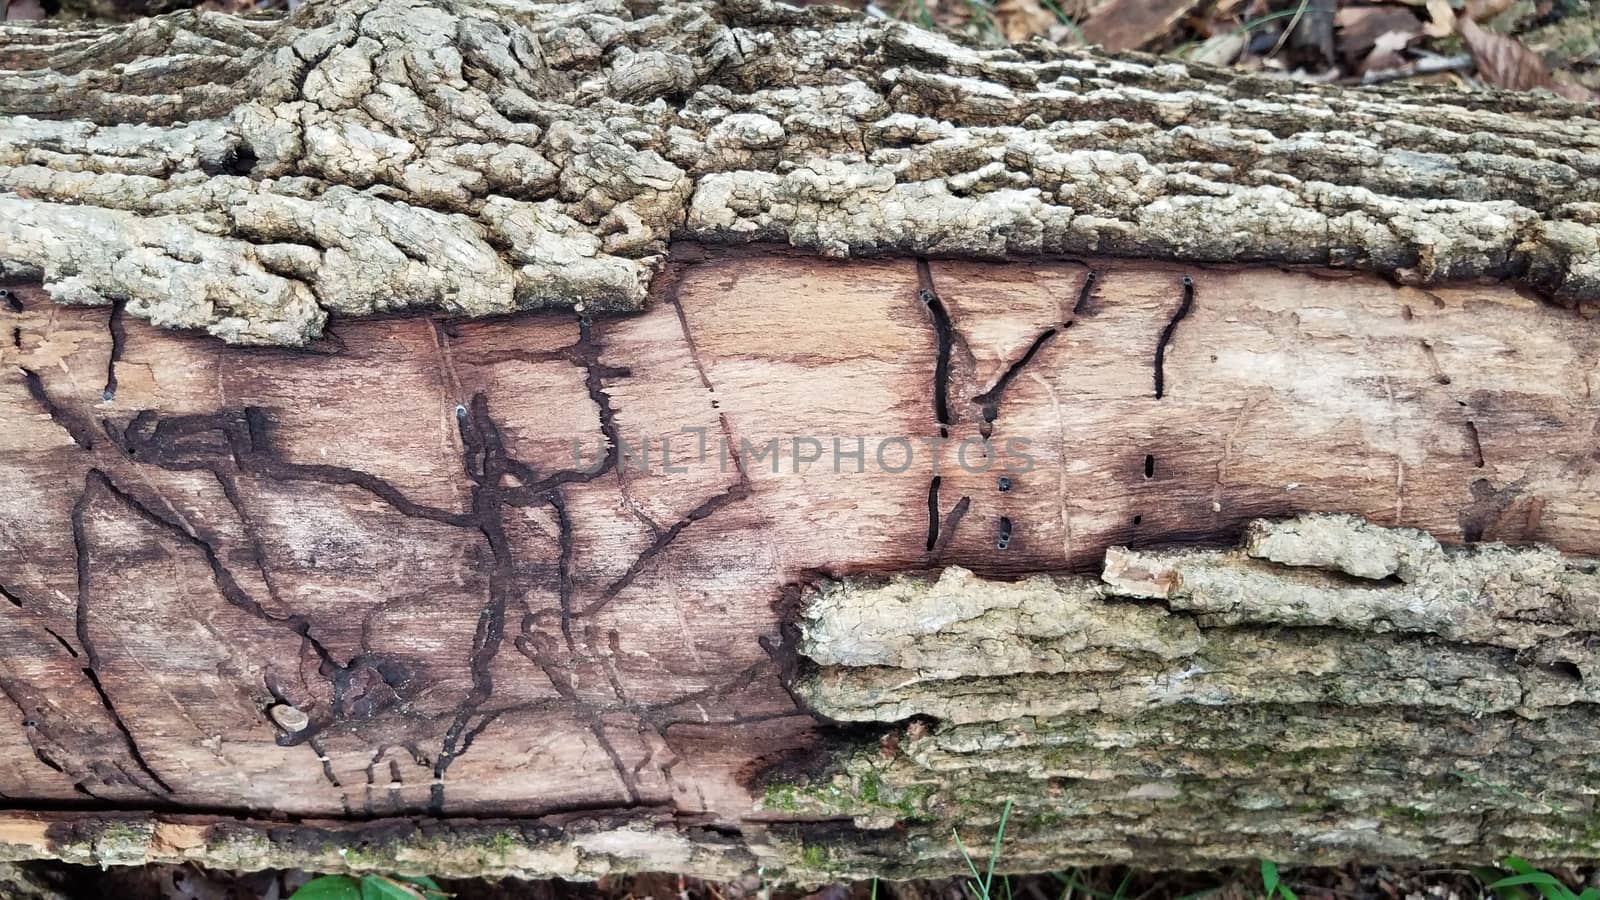 decaying wood log with termite or beetle or worm damage by stockphotofan1